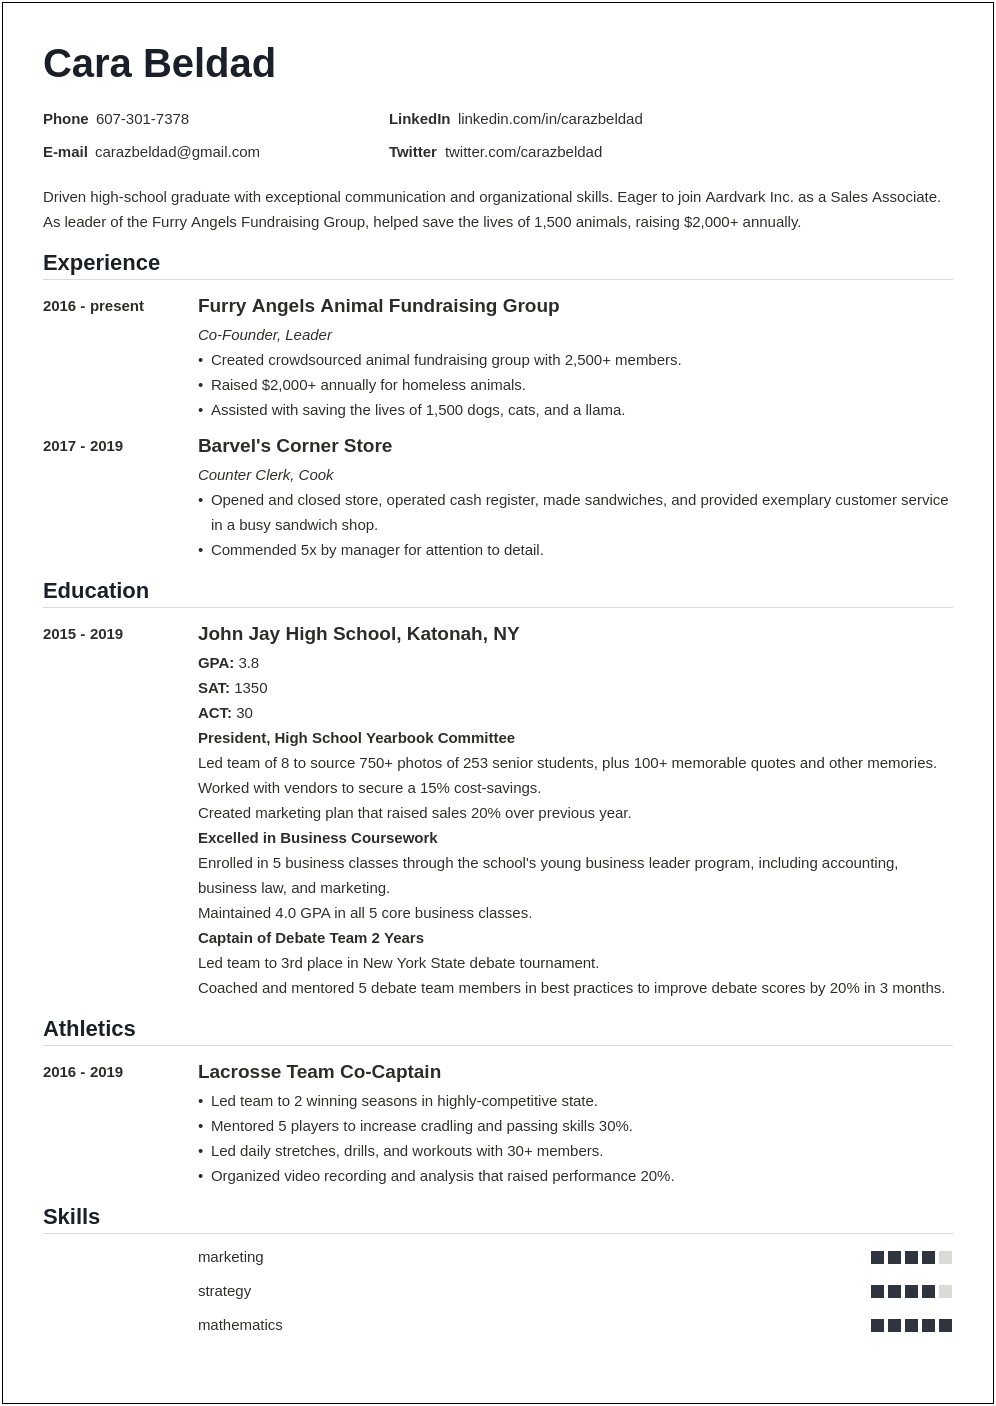 Graduate Student With Some Experience Resume Summary